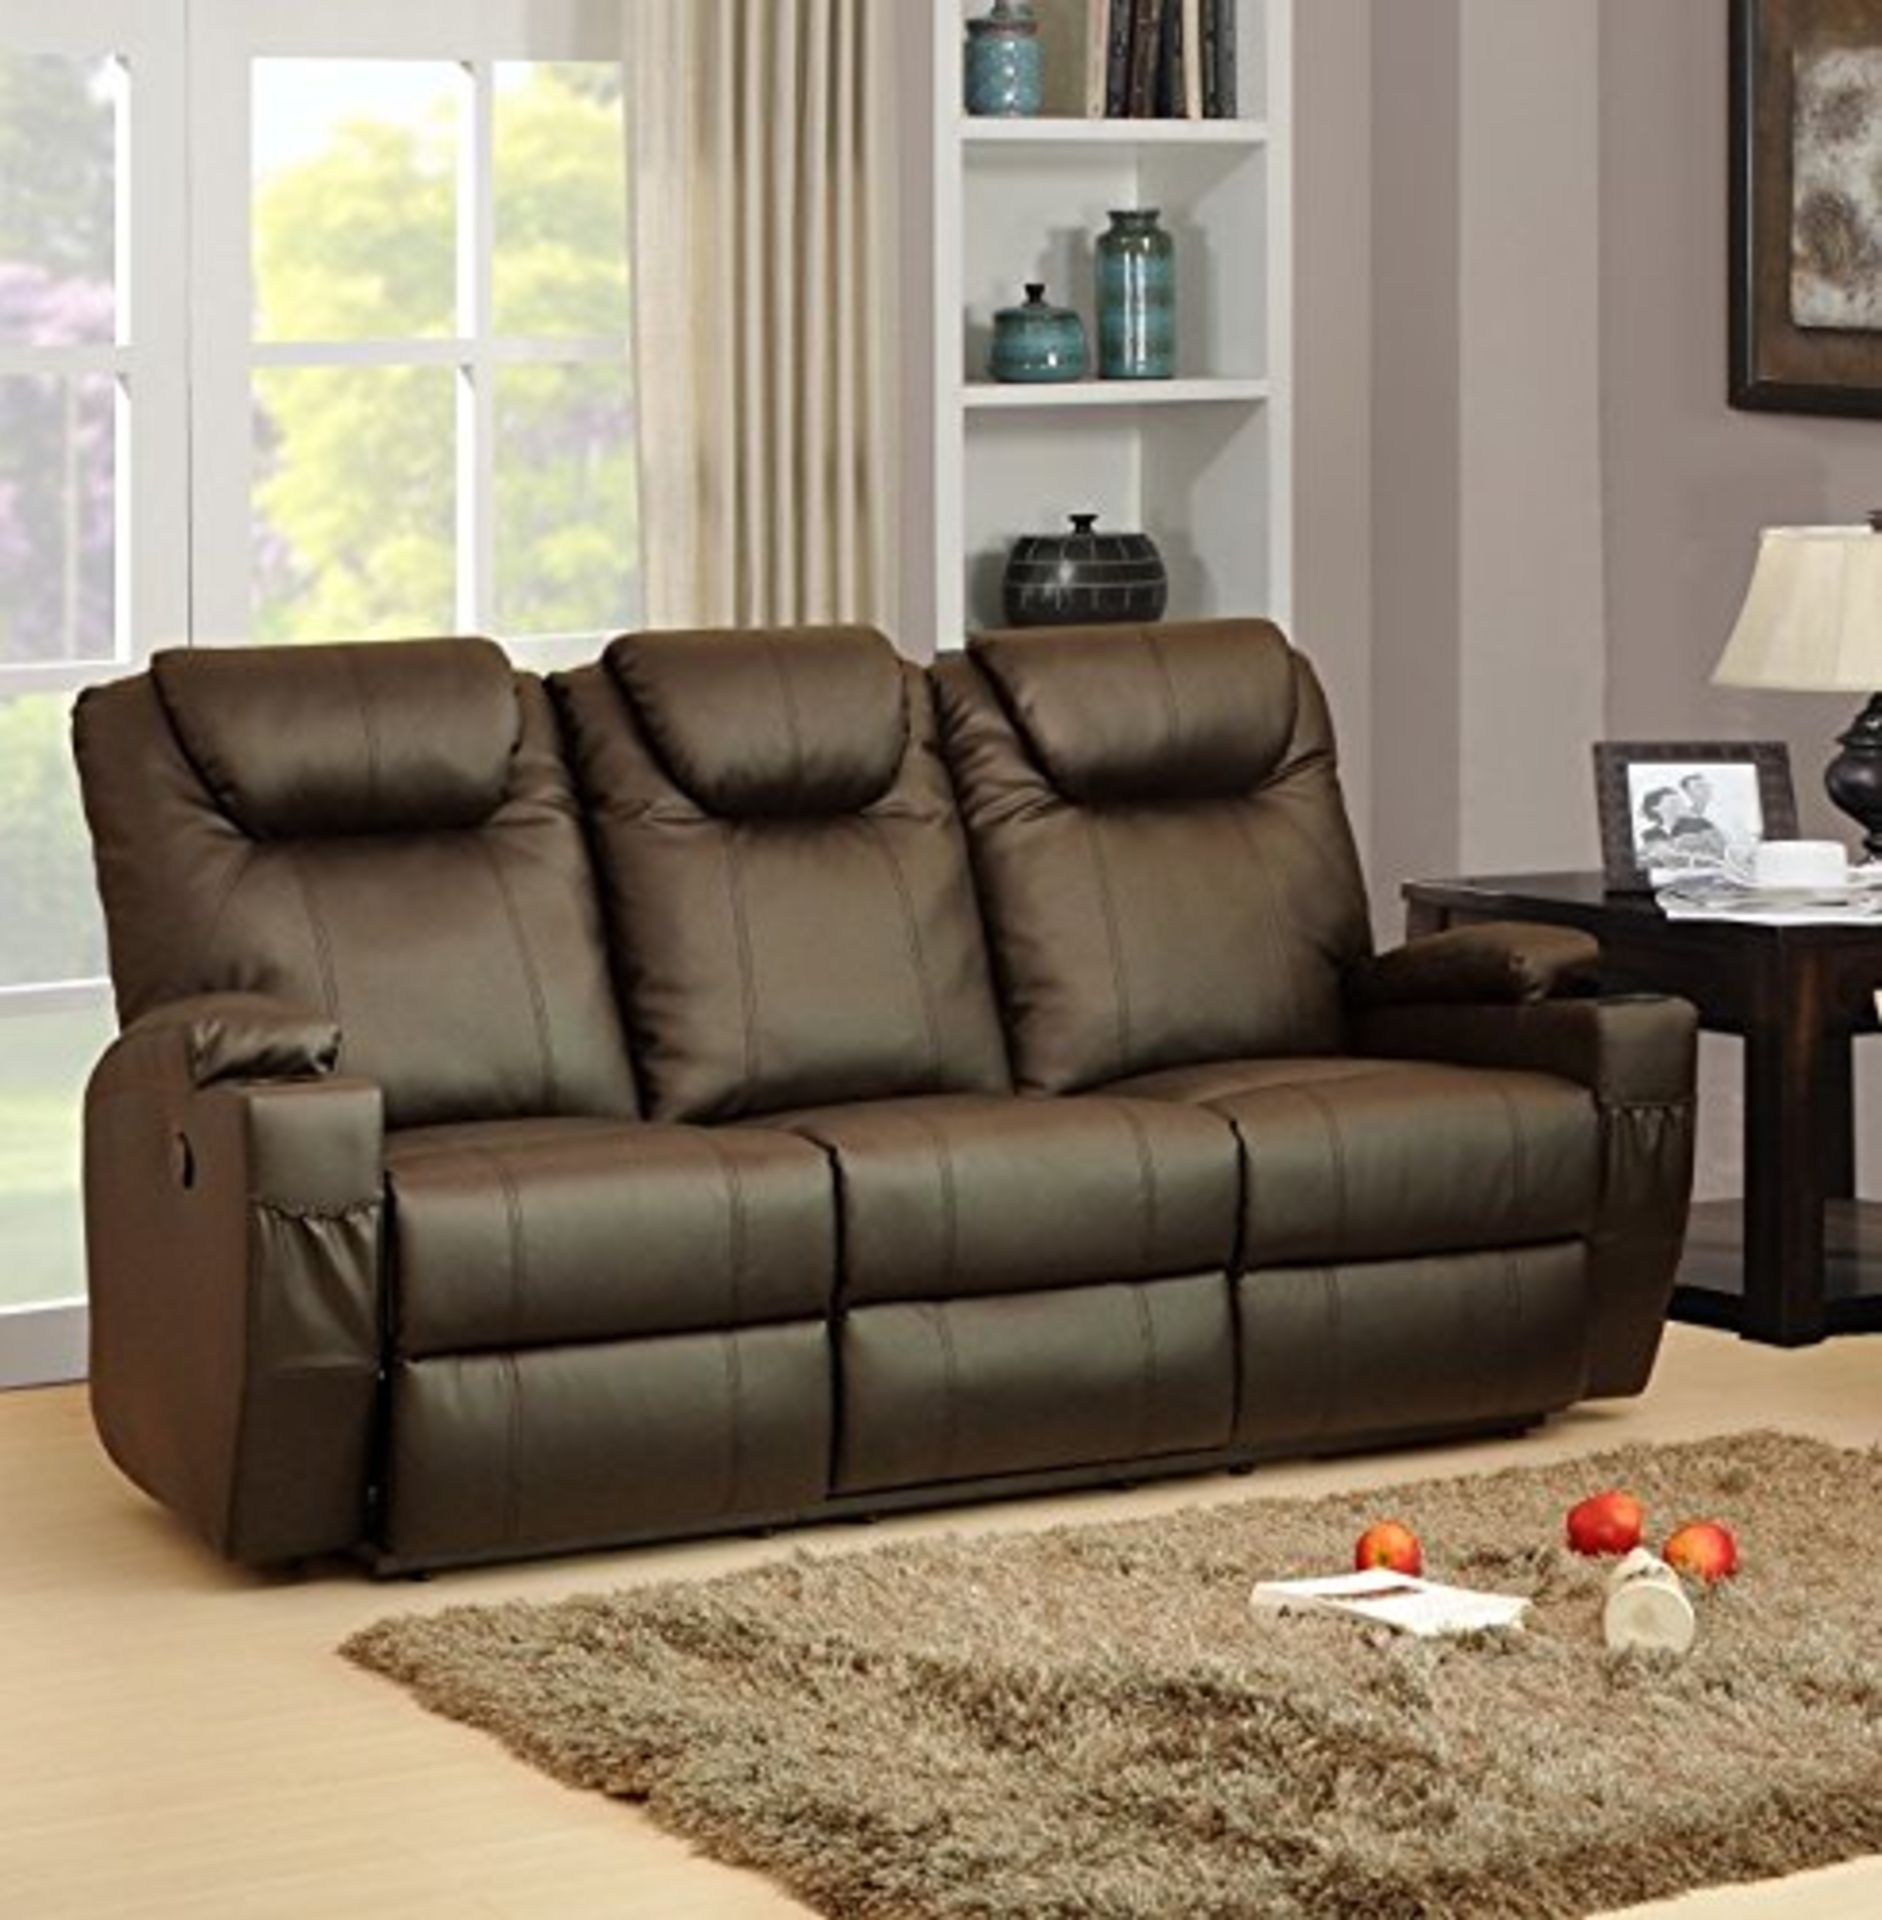 Brand New Boxed 3 Seater Plus 2 Seater Lazyboy Brown Leather Manual Reclining Sofas - Bild 2 aus 2